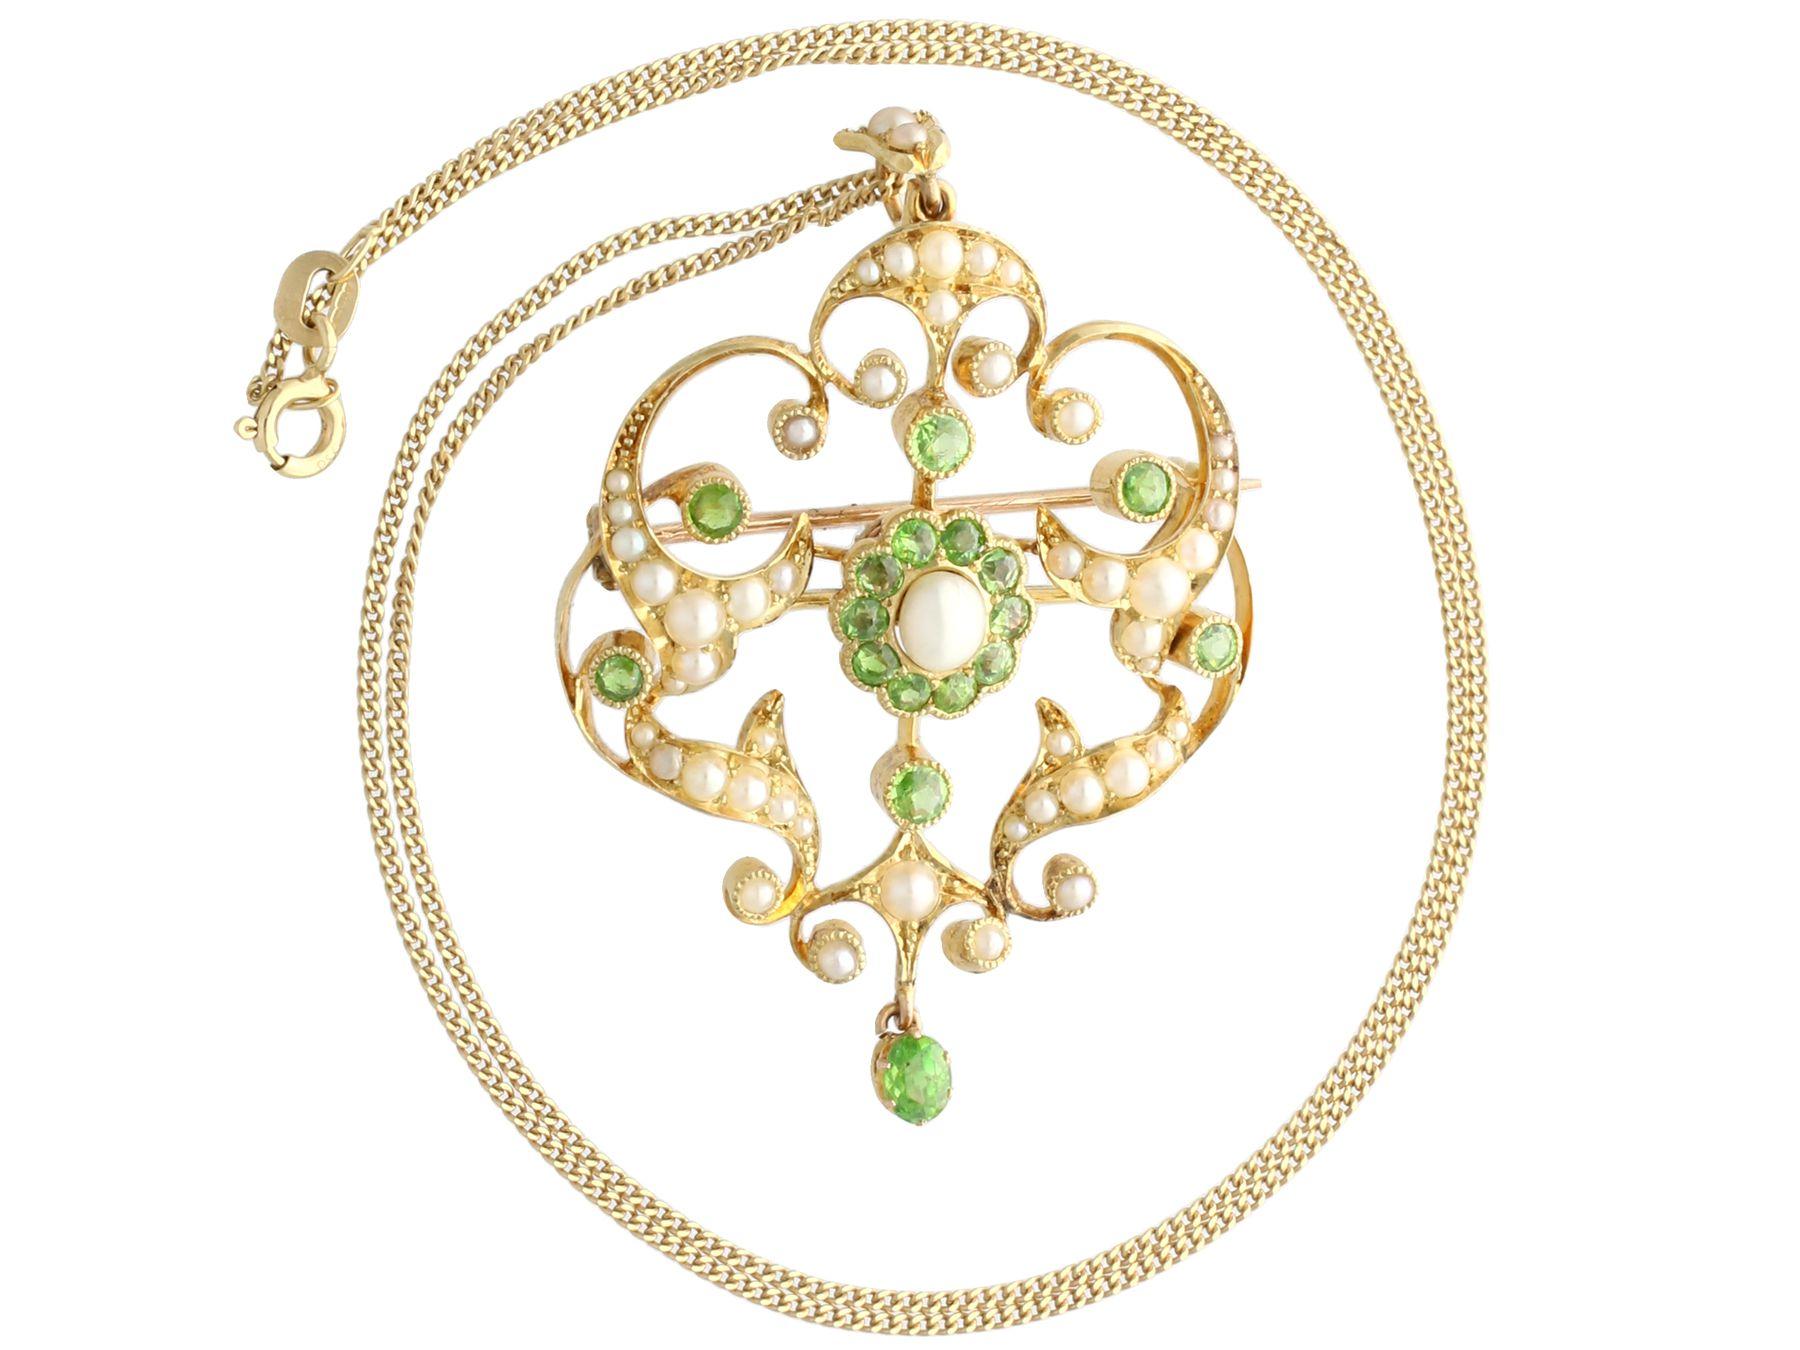 A stunning, fine and impressive antique 1.19 carat demantoid garnet and seed pearl, 15 karat yellow gold pendant / brooch; part of our diverse gemstone jewelry and estate jewelry collections

This stunning, fine and impressive antique pendant has